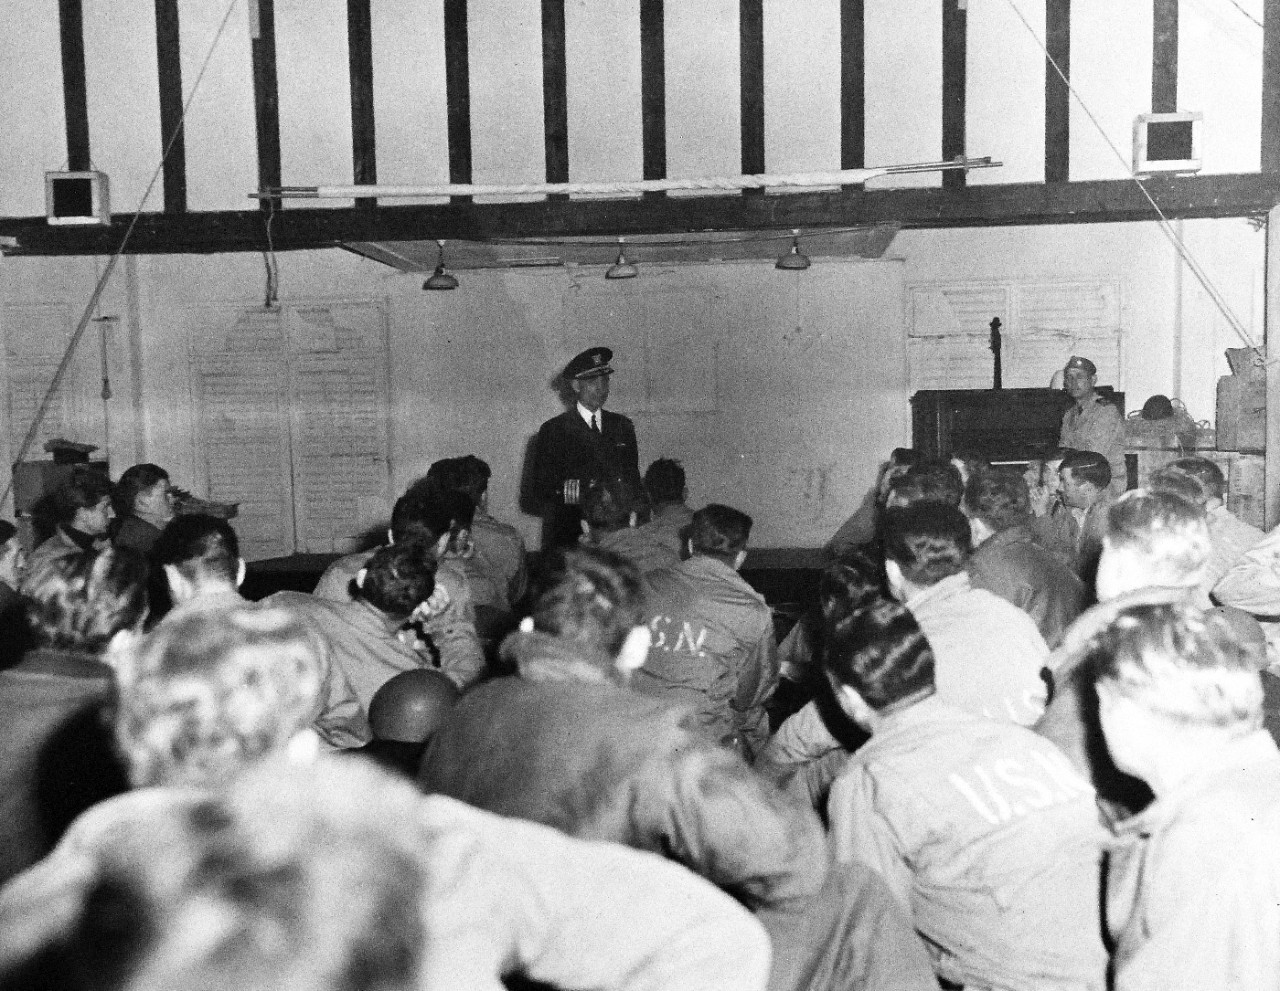 80-G-285139:  Normandy Invasion, Crossing the Channel, June 1944.   Captain Clark briefs a group of Navy men on board ship preparatory to invasion of France.  Photograph released November 7, 1944.  U.S. Navy photograph, now in the collections of the National Archives.  (2016/03/15).